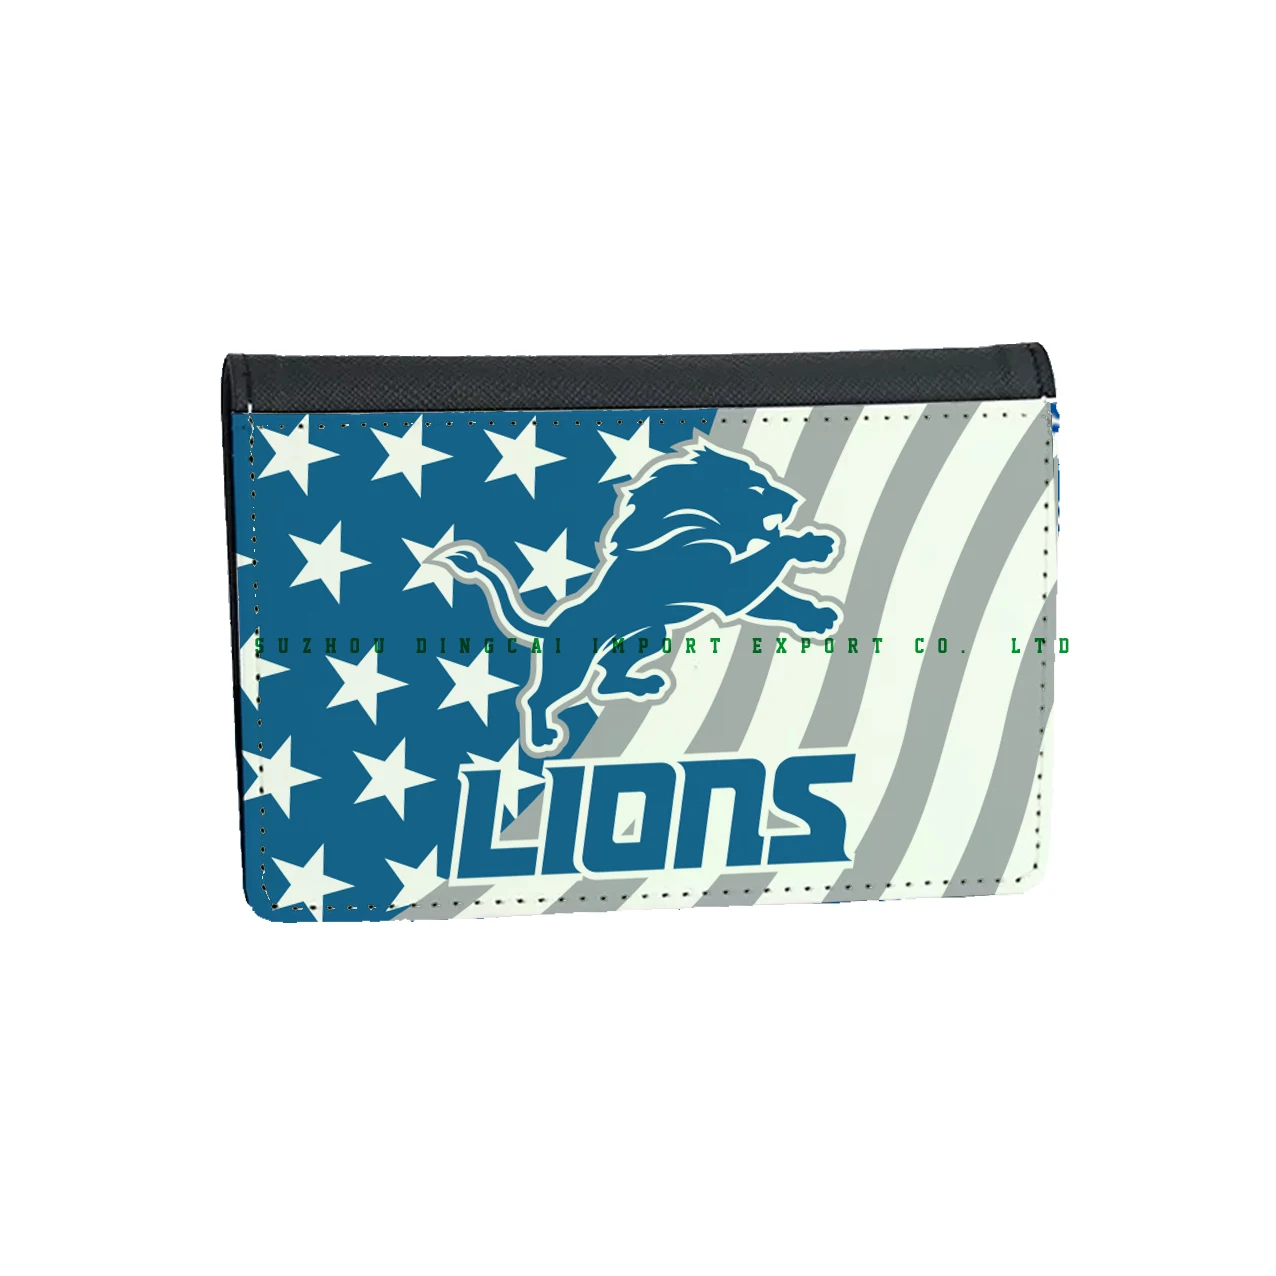 Custom 14.6X9cm Passport Cover  PU Leather Detroit Lions  Passport Holder Cover Case with Card Slot